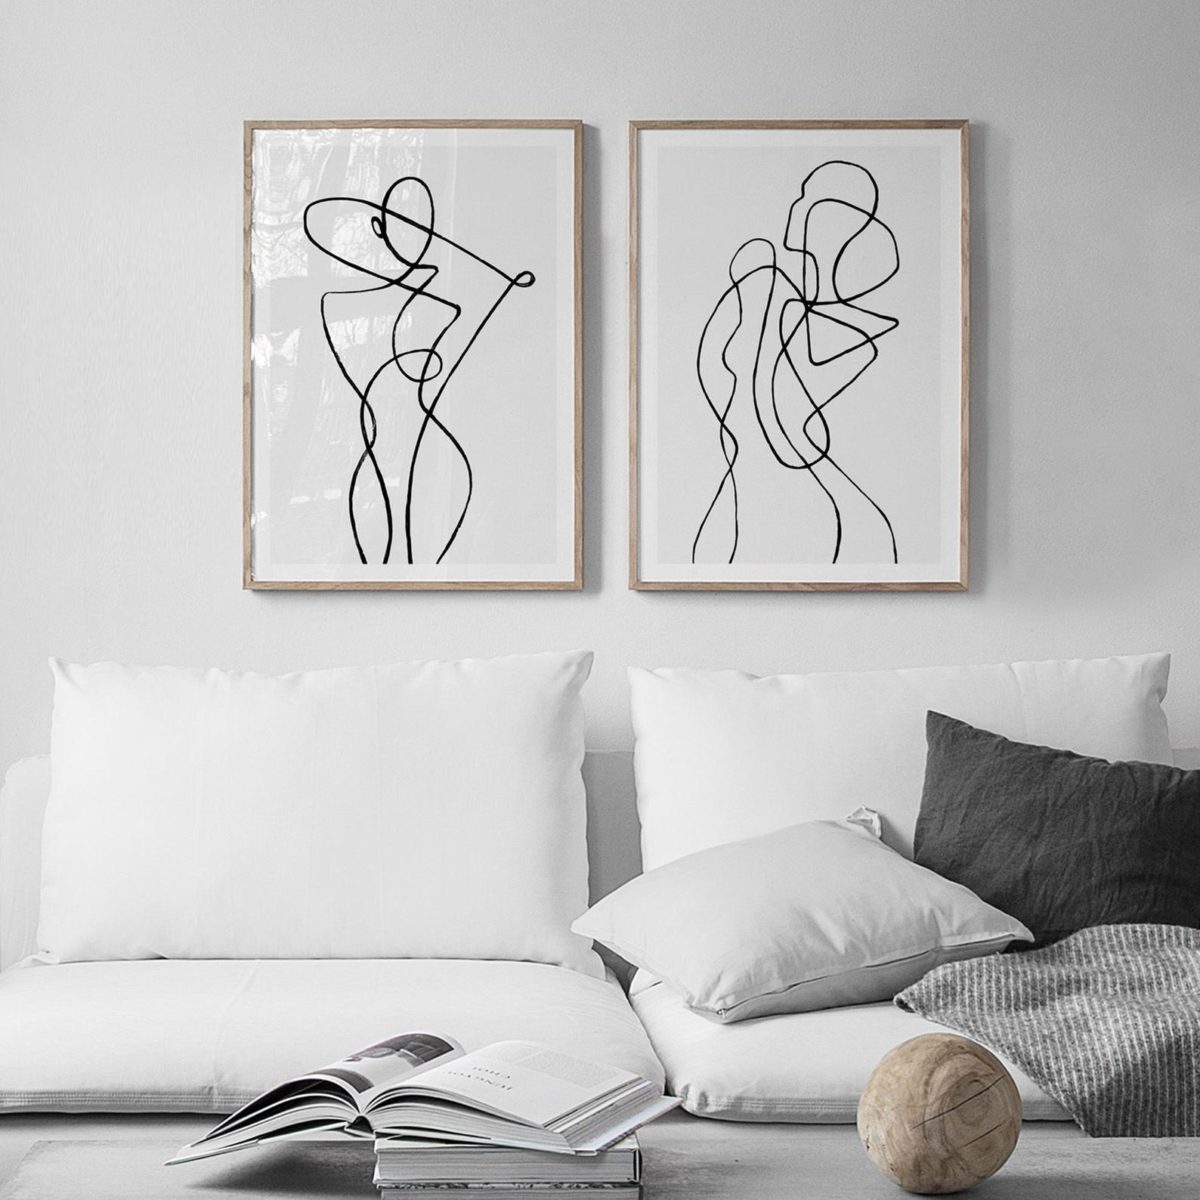 13 pieces of wall art from etsy you're sure to love